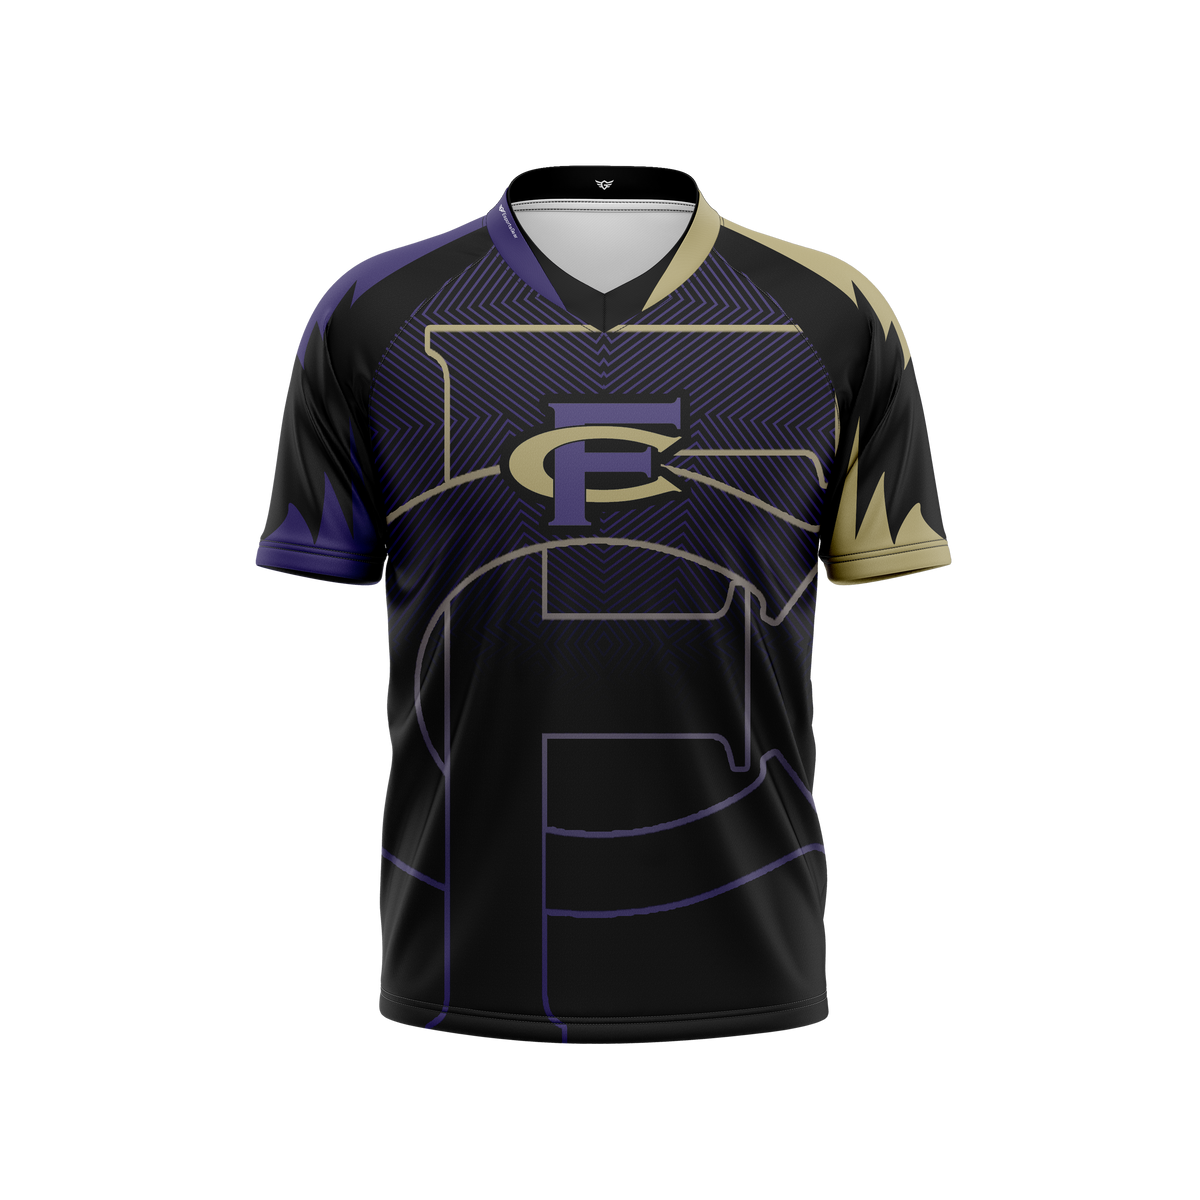 Fort Collins High School | Sublimated | Jersey